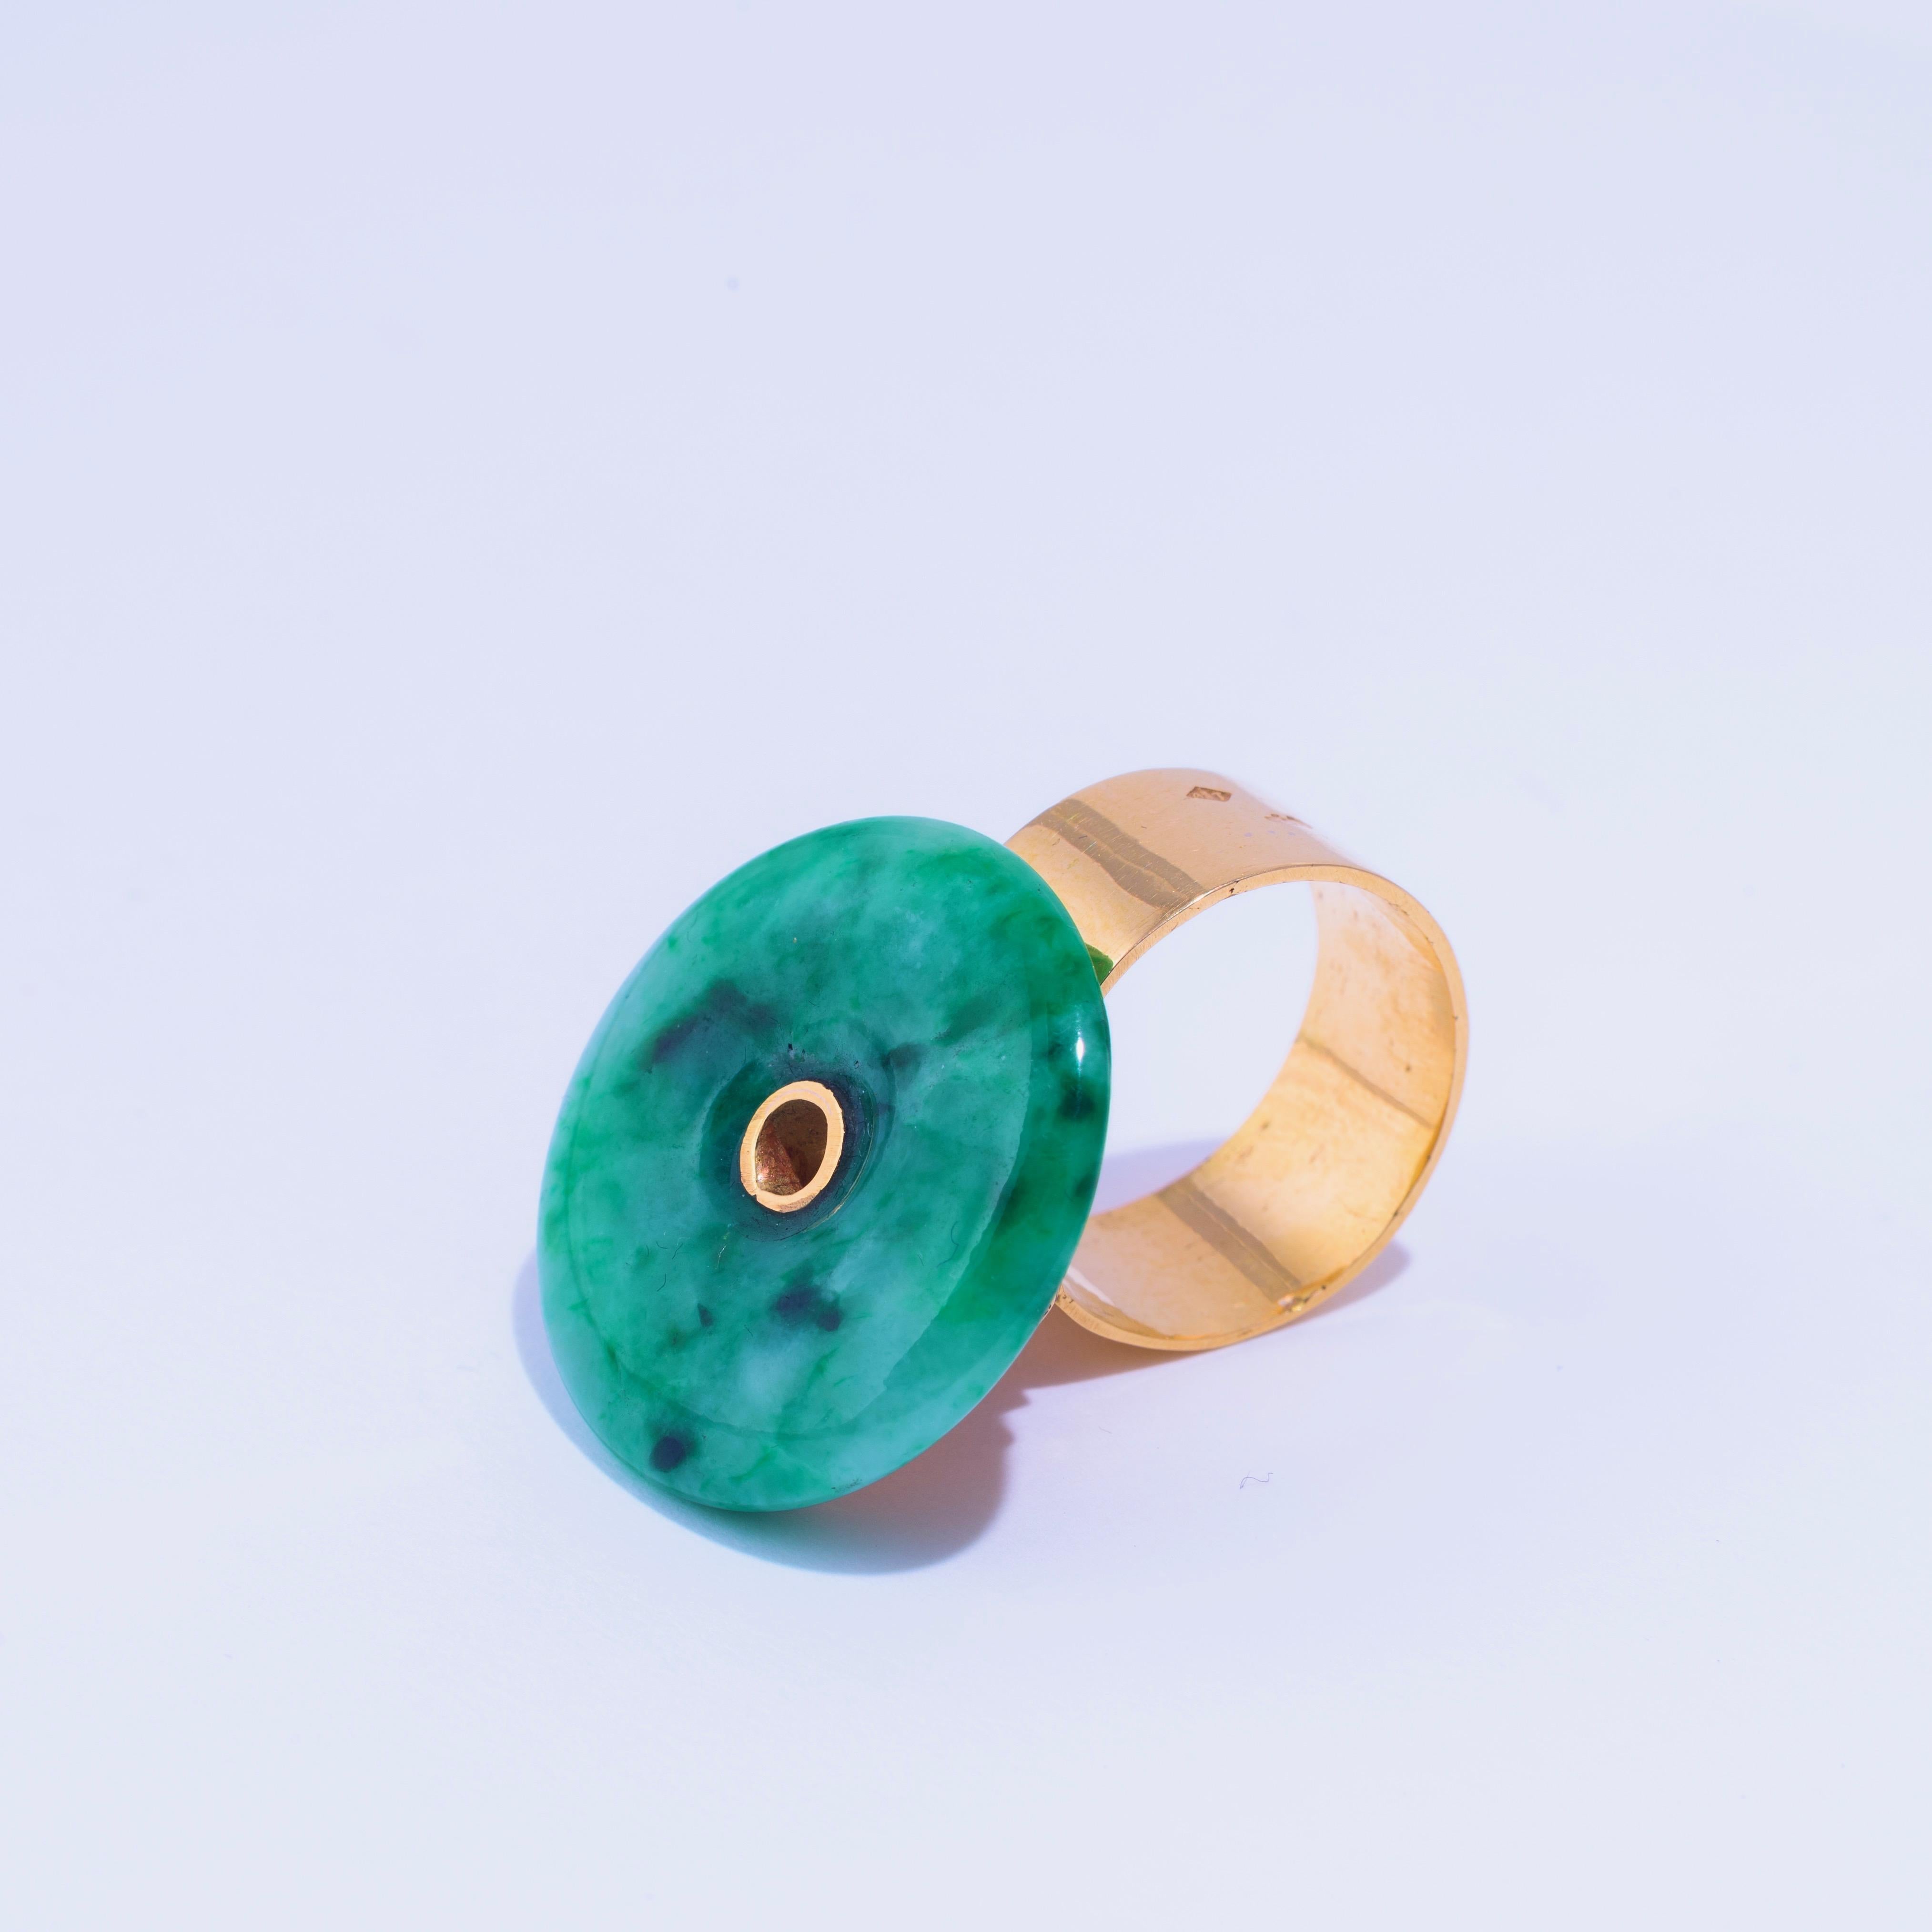 Vintage Playful Ring by Jean Vendome at Second Petale Gallery. 

Bi disc in Jade. Maker's mark. Expert certificate.
Resizable. Delay 4 weeks 
Note to Customers in Europe: contact us for VAT details.

ABOUT SECOND PETALE GALLERY
Paris-based online